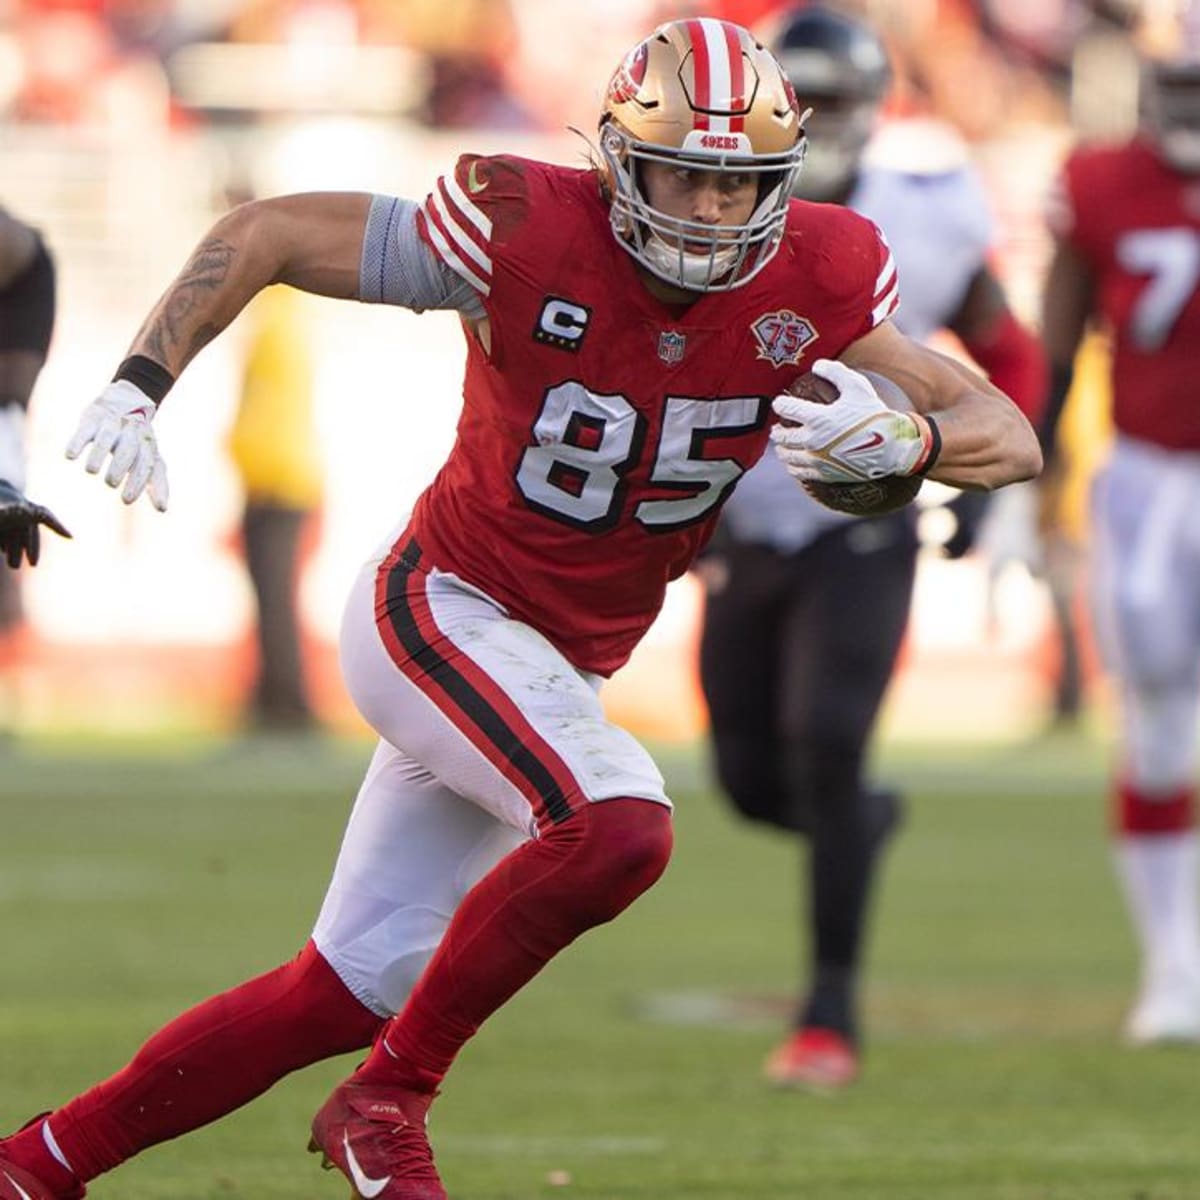 kittle on the 49ers